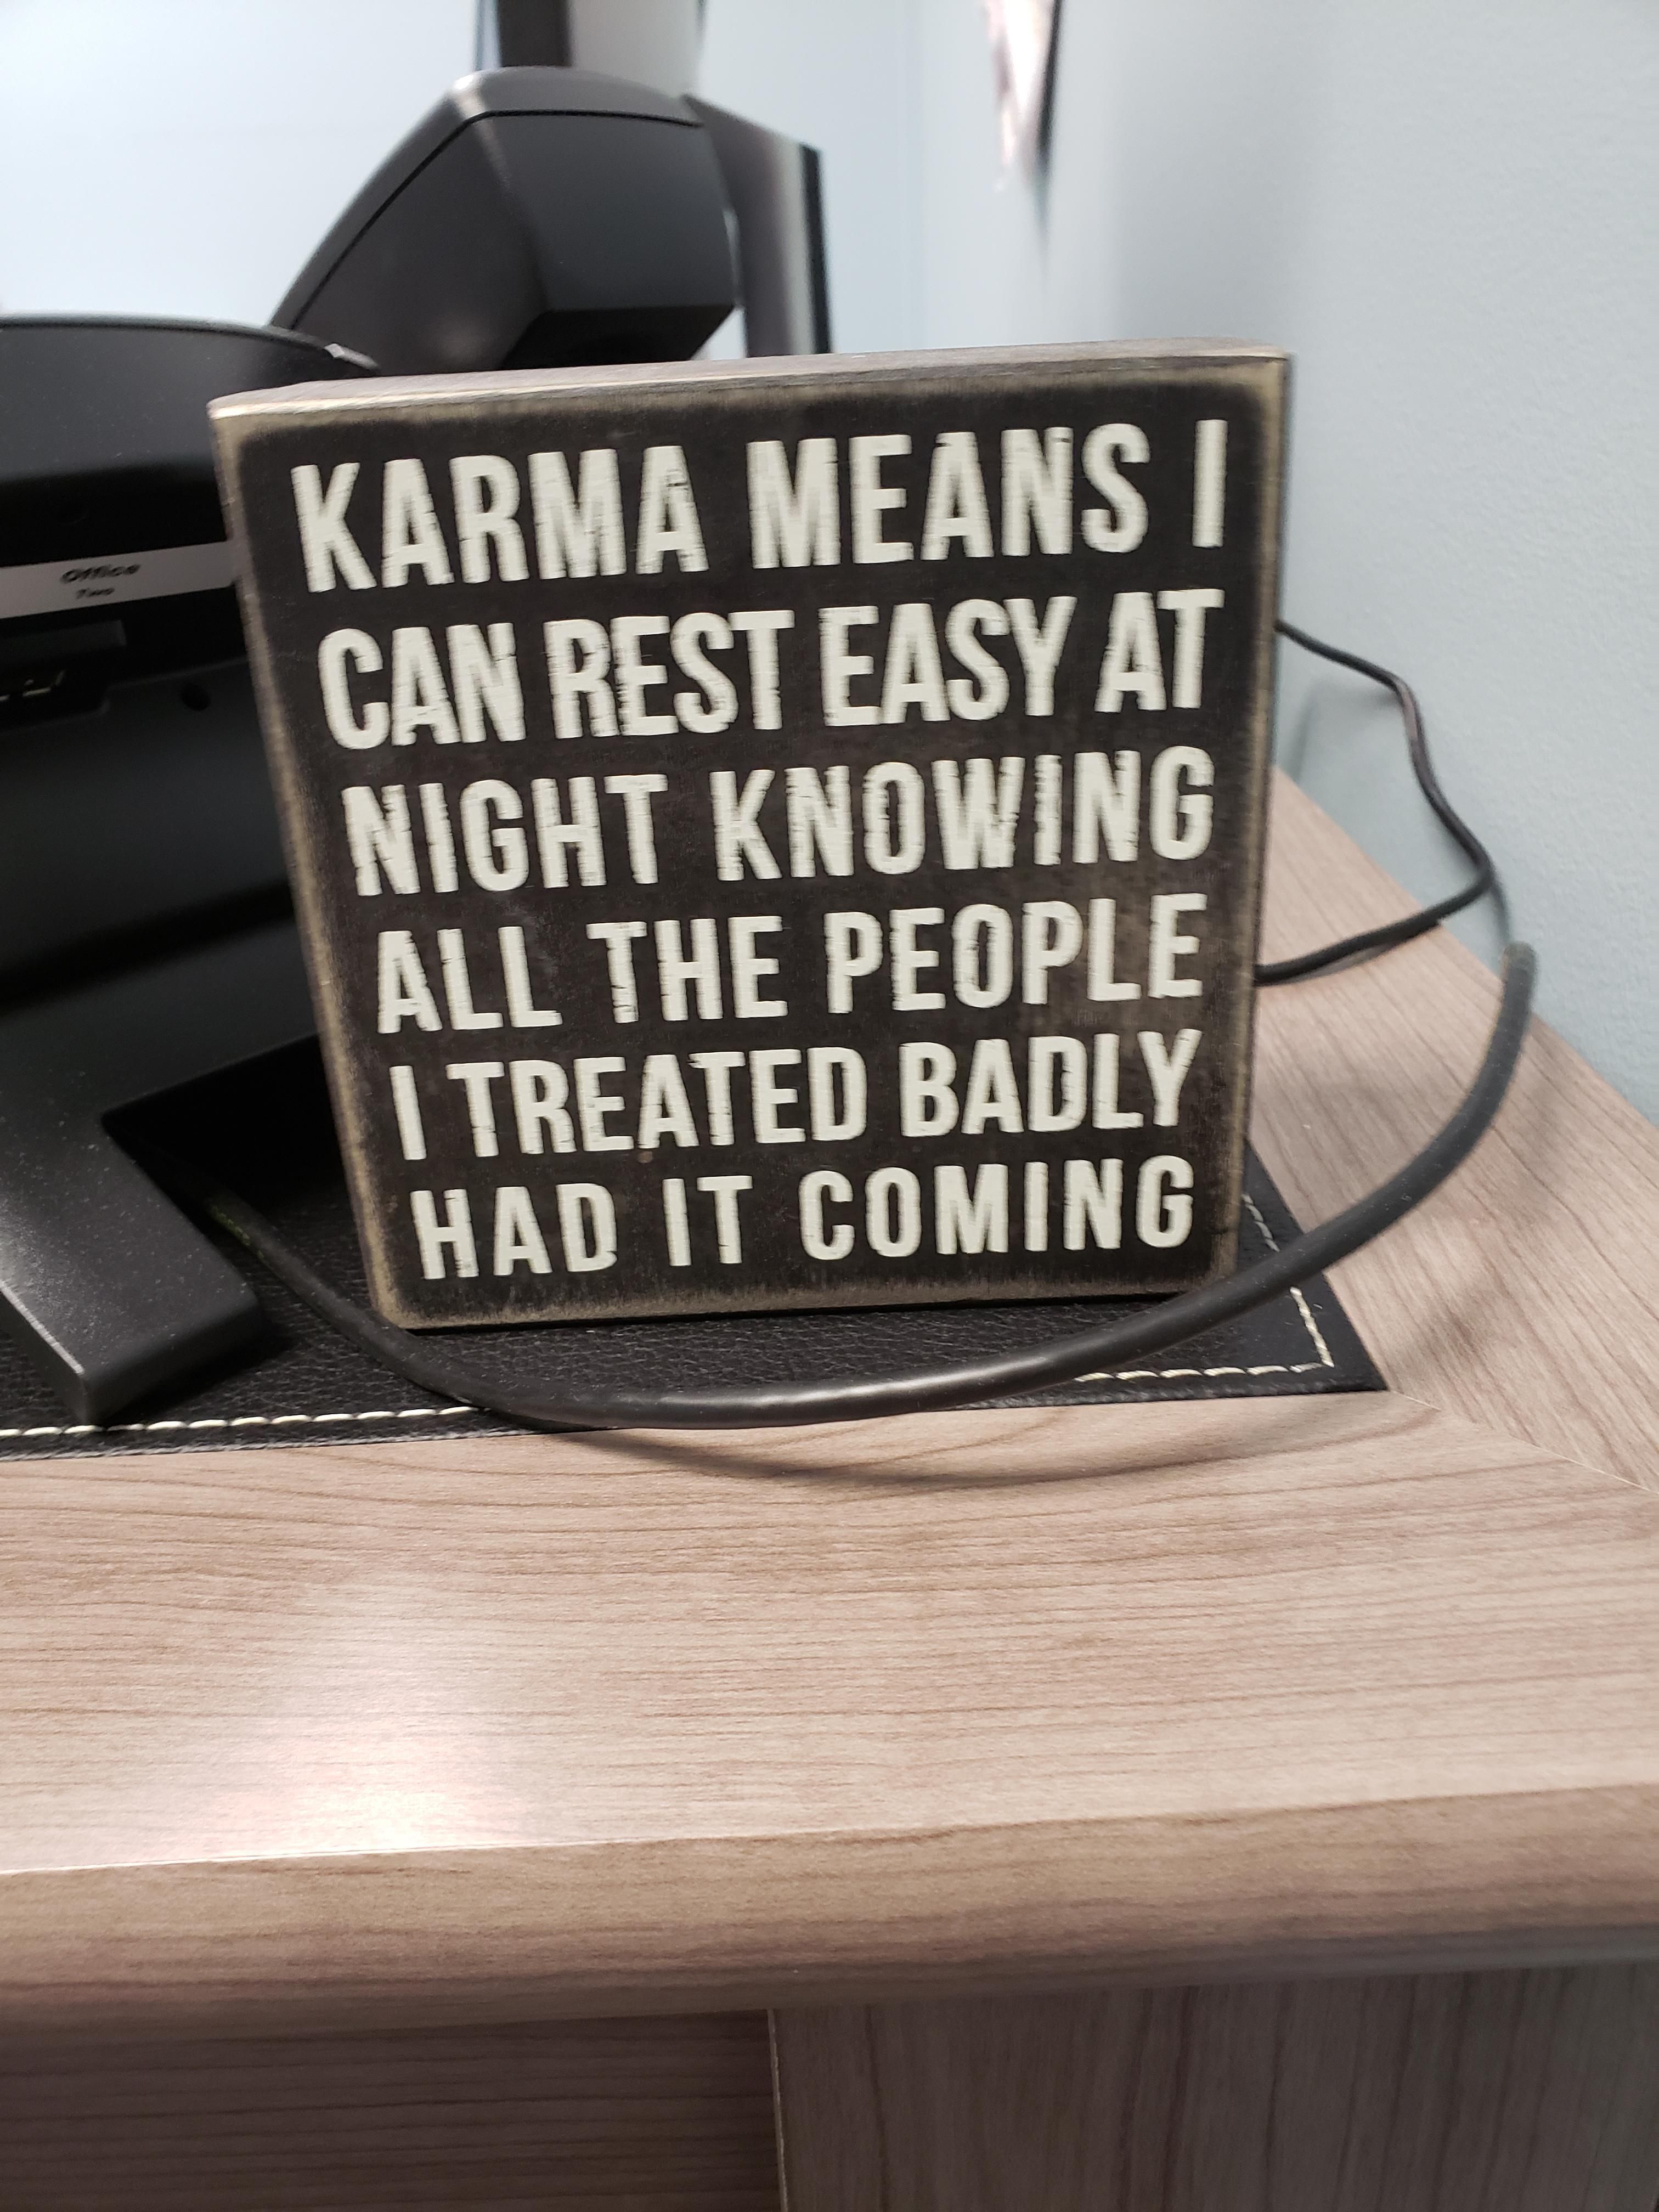 Karma may be a *** but it turns out she is also my wife? Found this on my wife's desk.